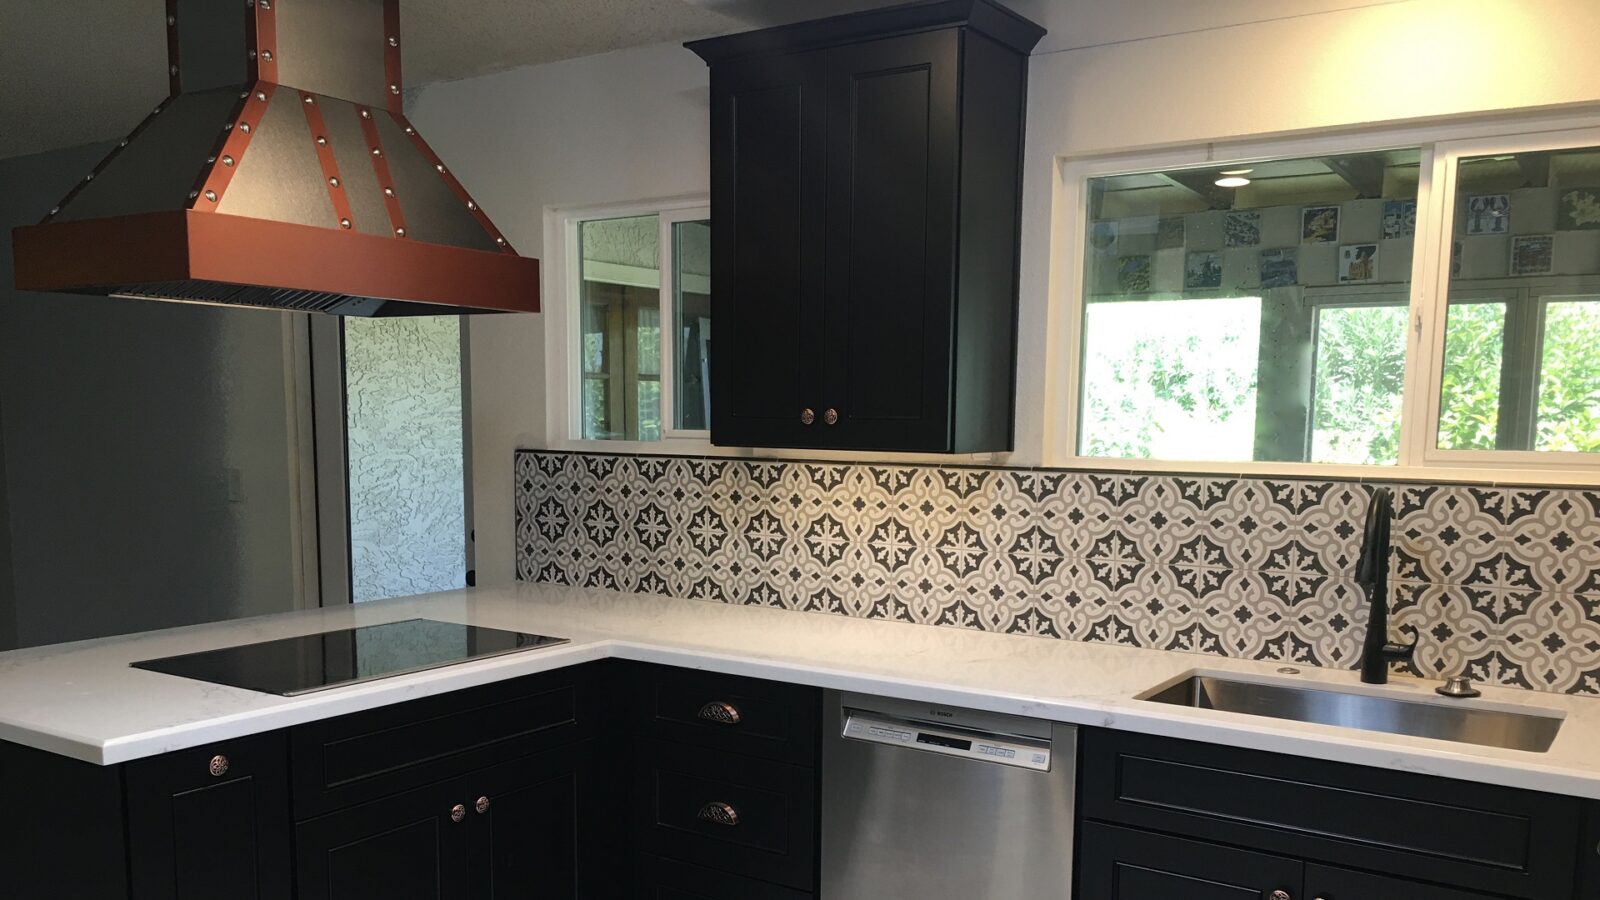 A white kitchen counter top with black cabinets